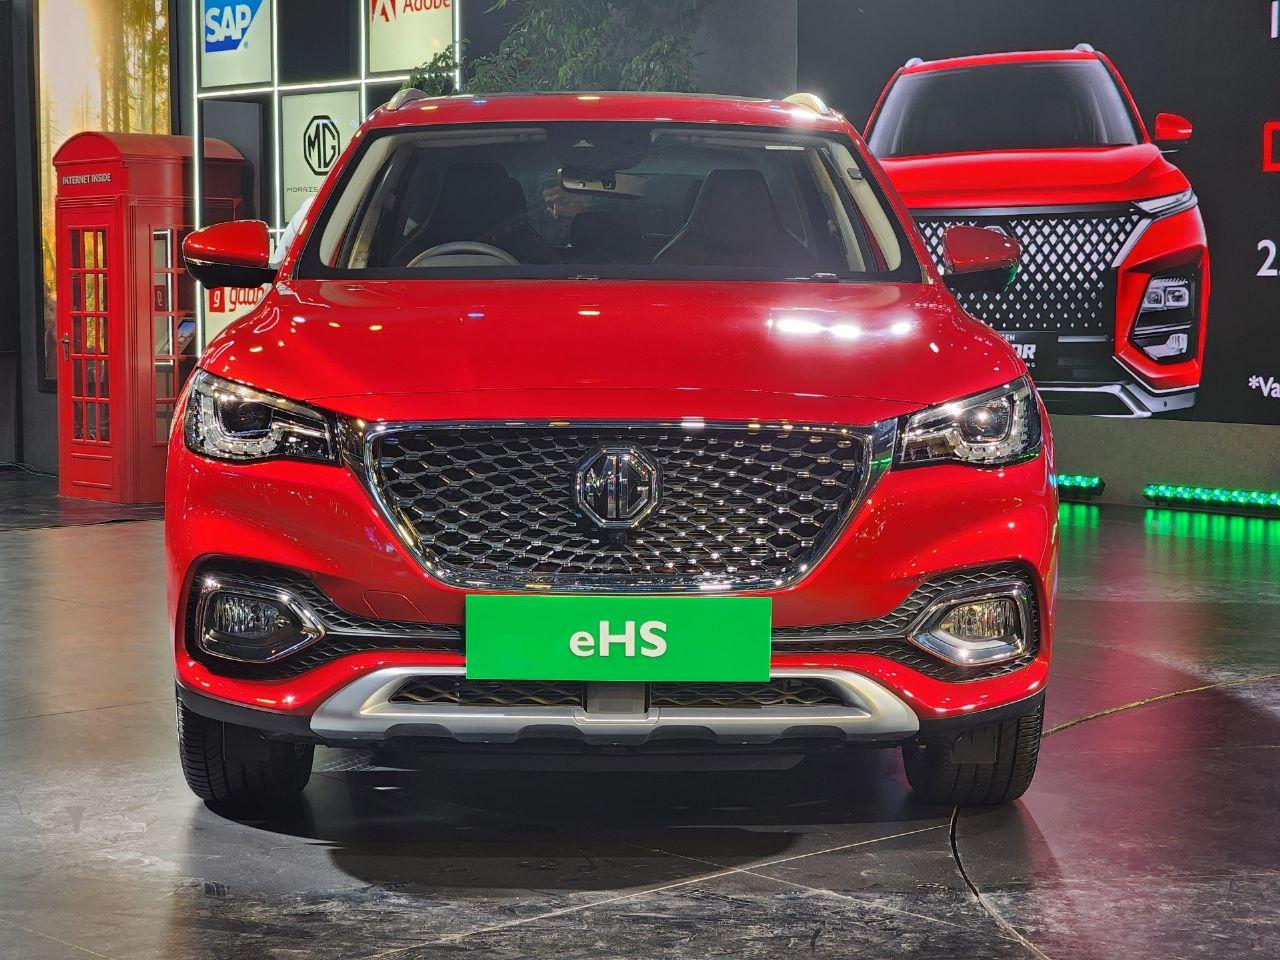 Auto Expo 2023: MG eHS plug-in hybrid crossover unveiled | Team-BHP